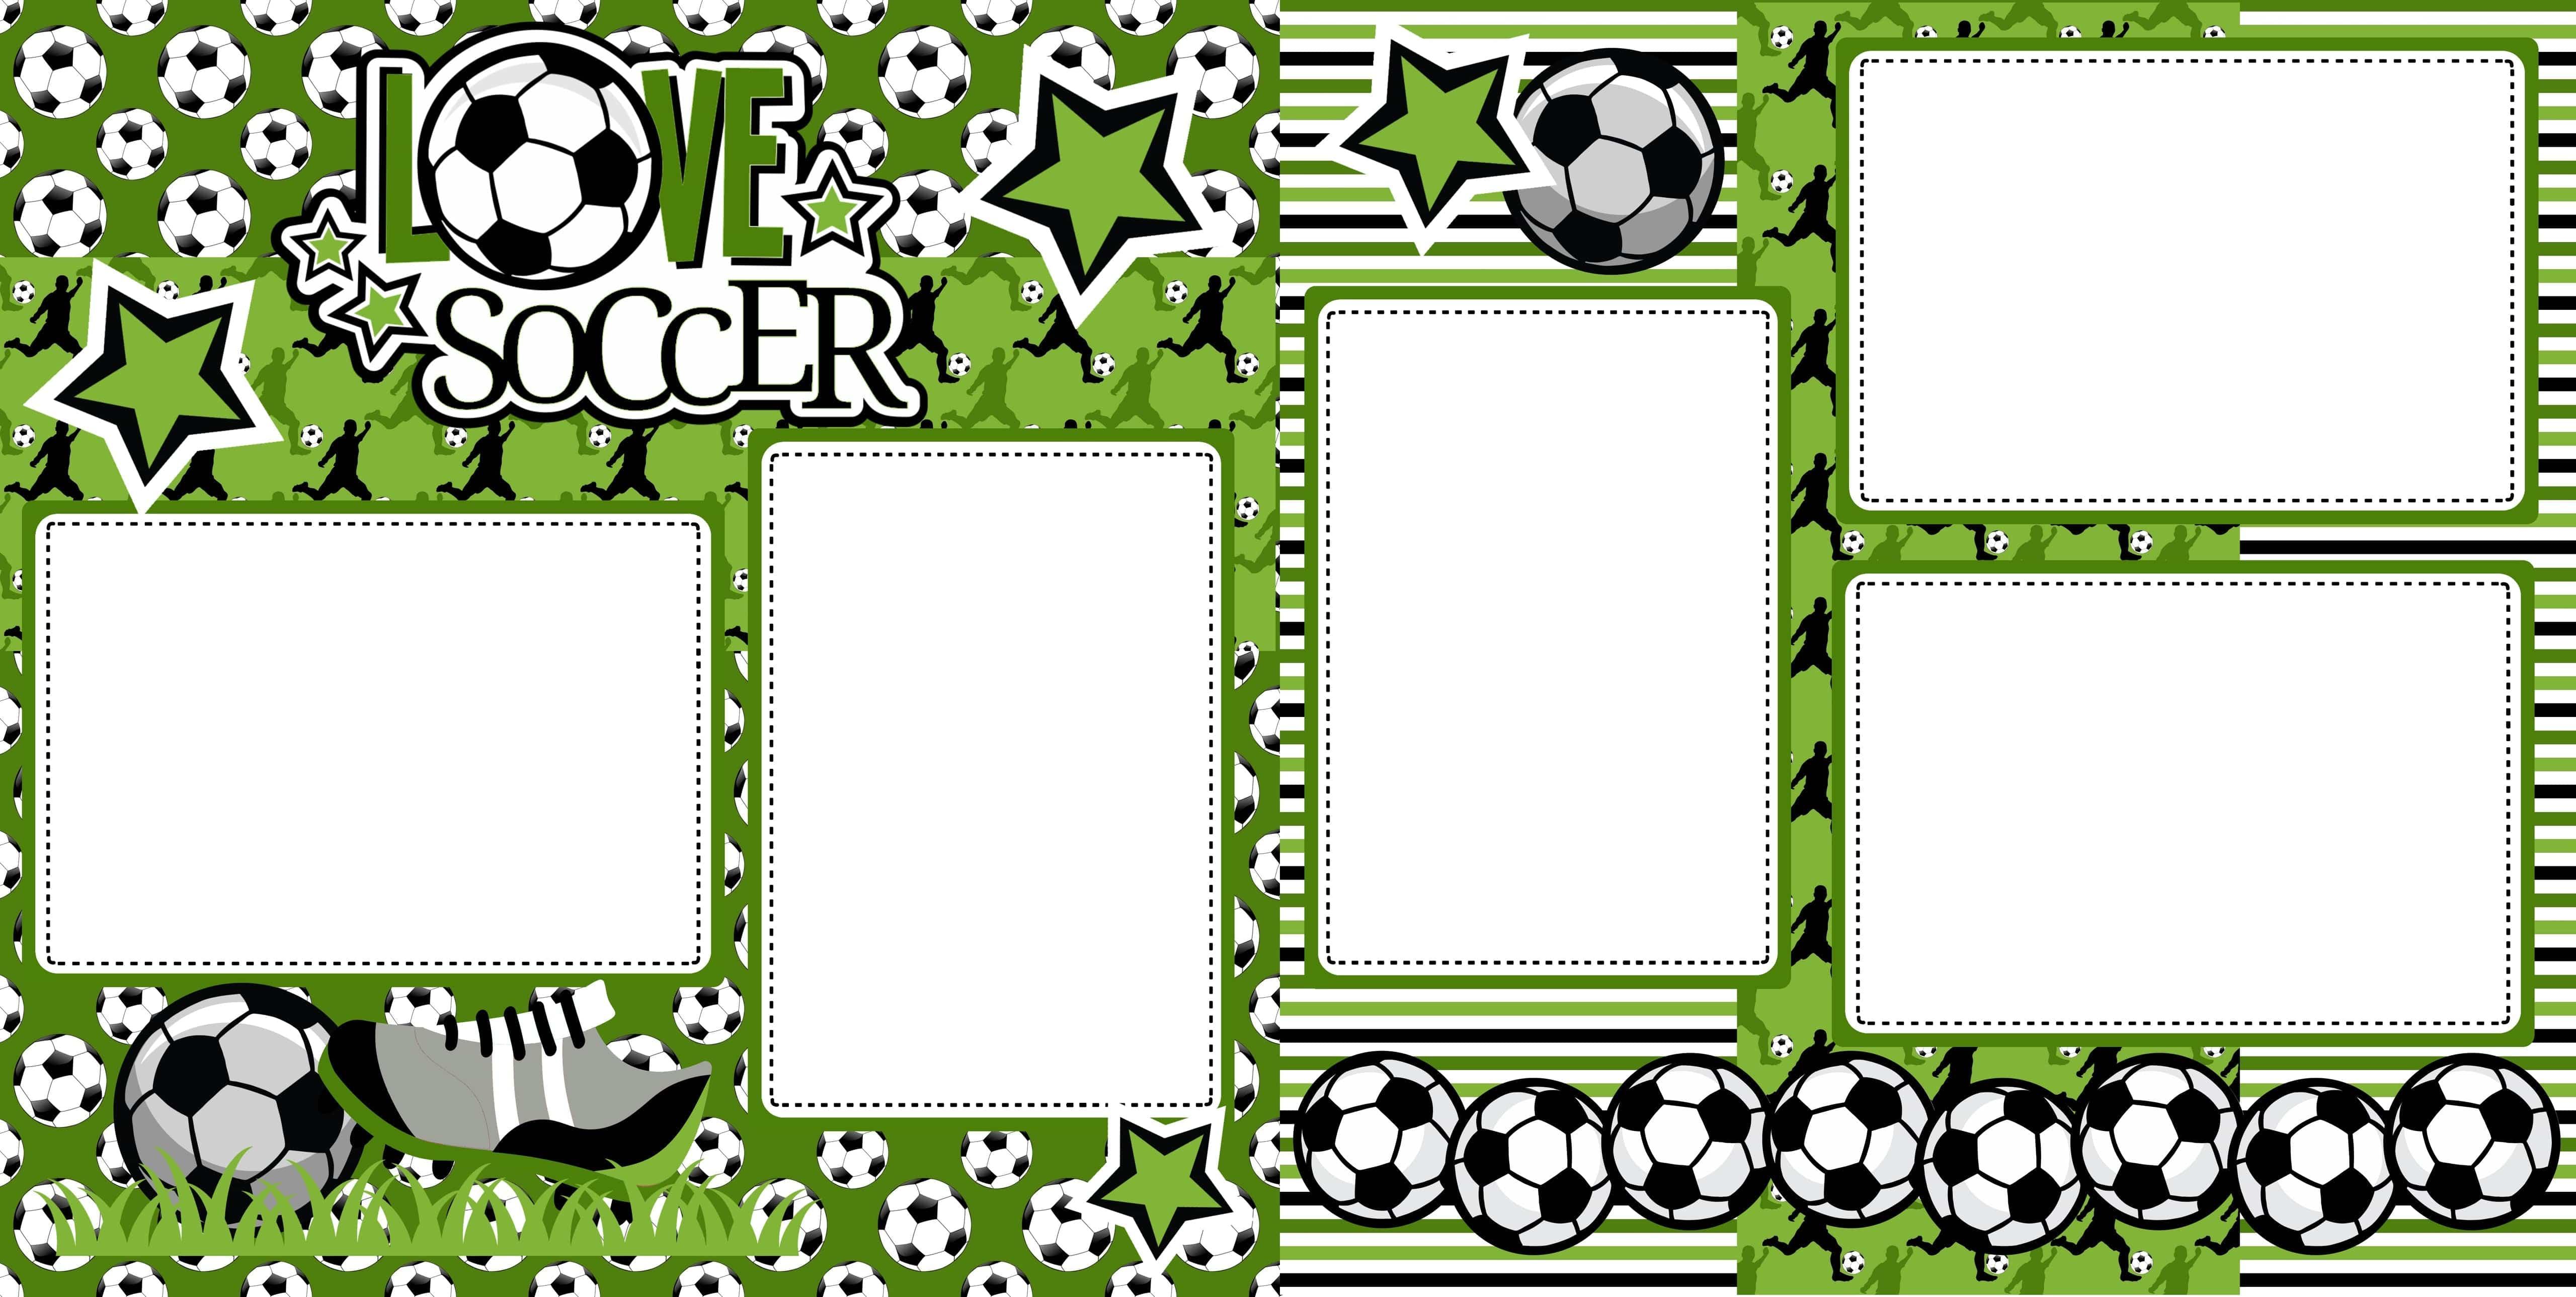 Love Soccer (2) - 12 x 12 Premade, Printed Scrapbook Pages by SSC Designs